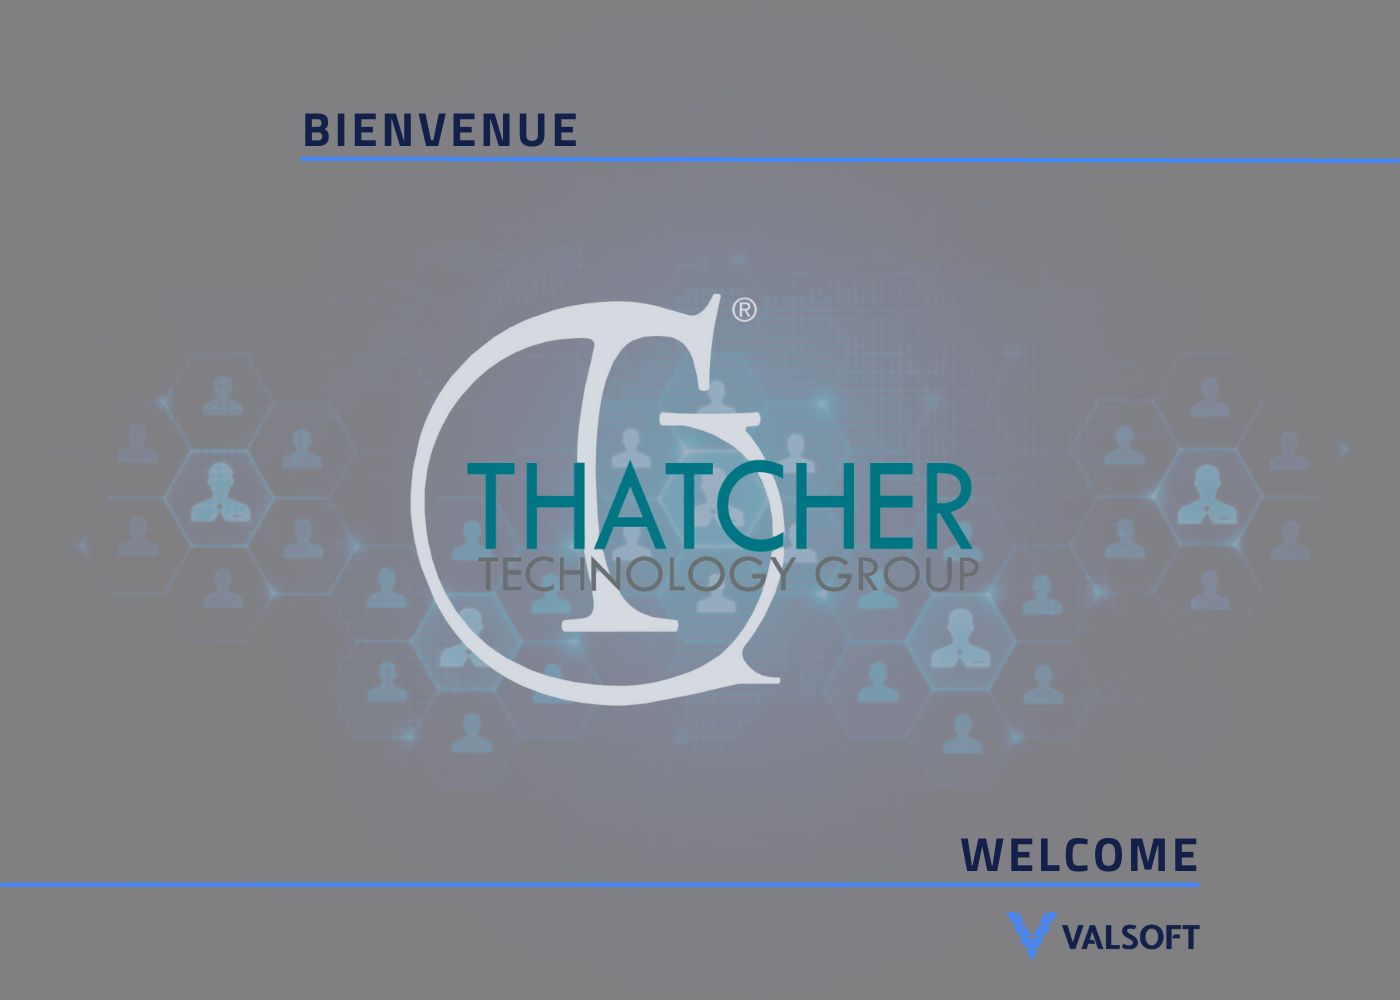 Valsoft Corporation acquires MLM Software and Services Provider Thatcher Technology Group